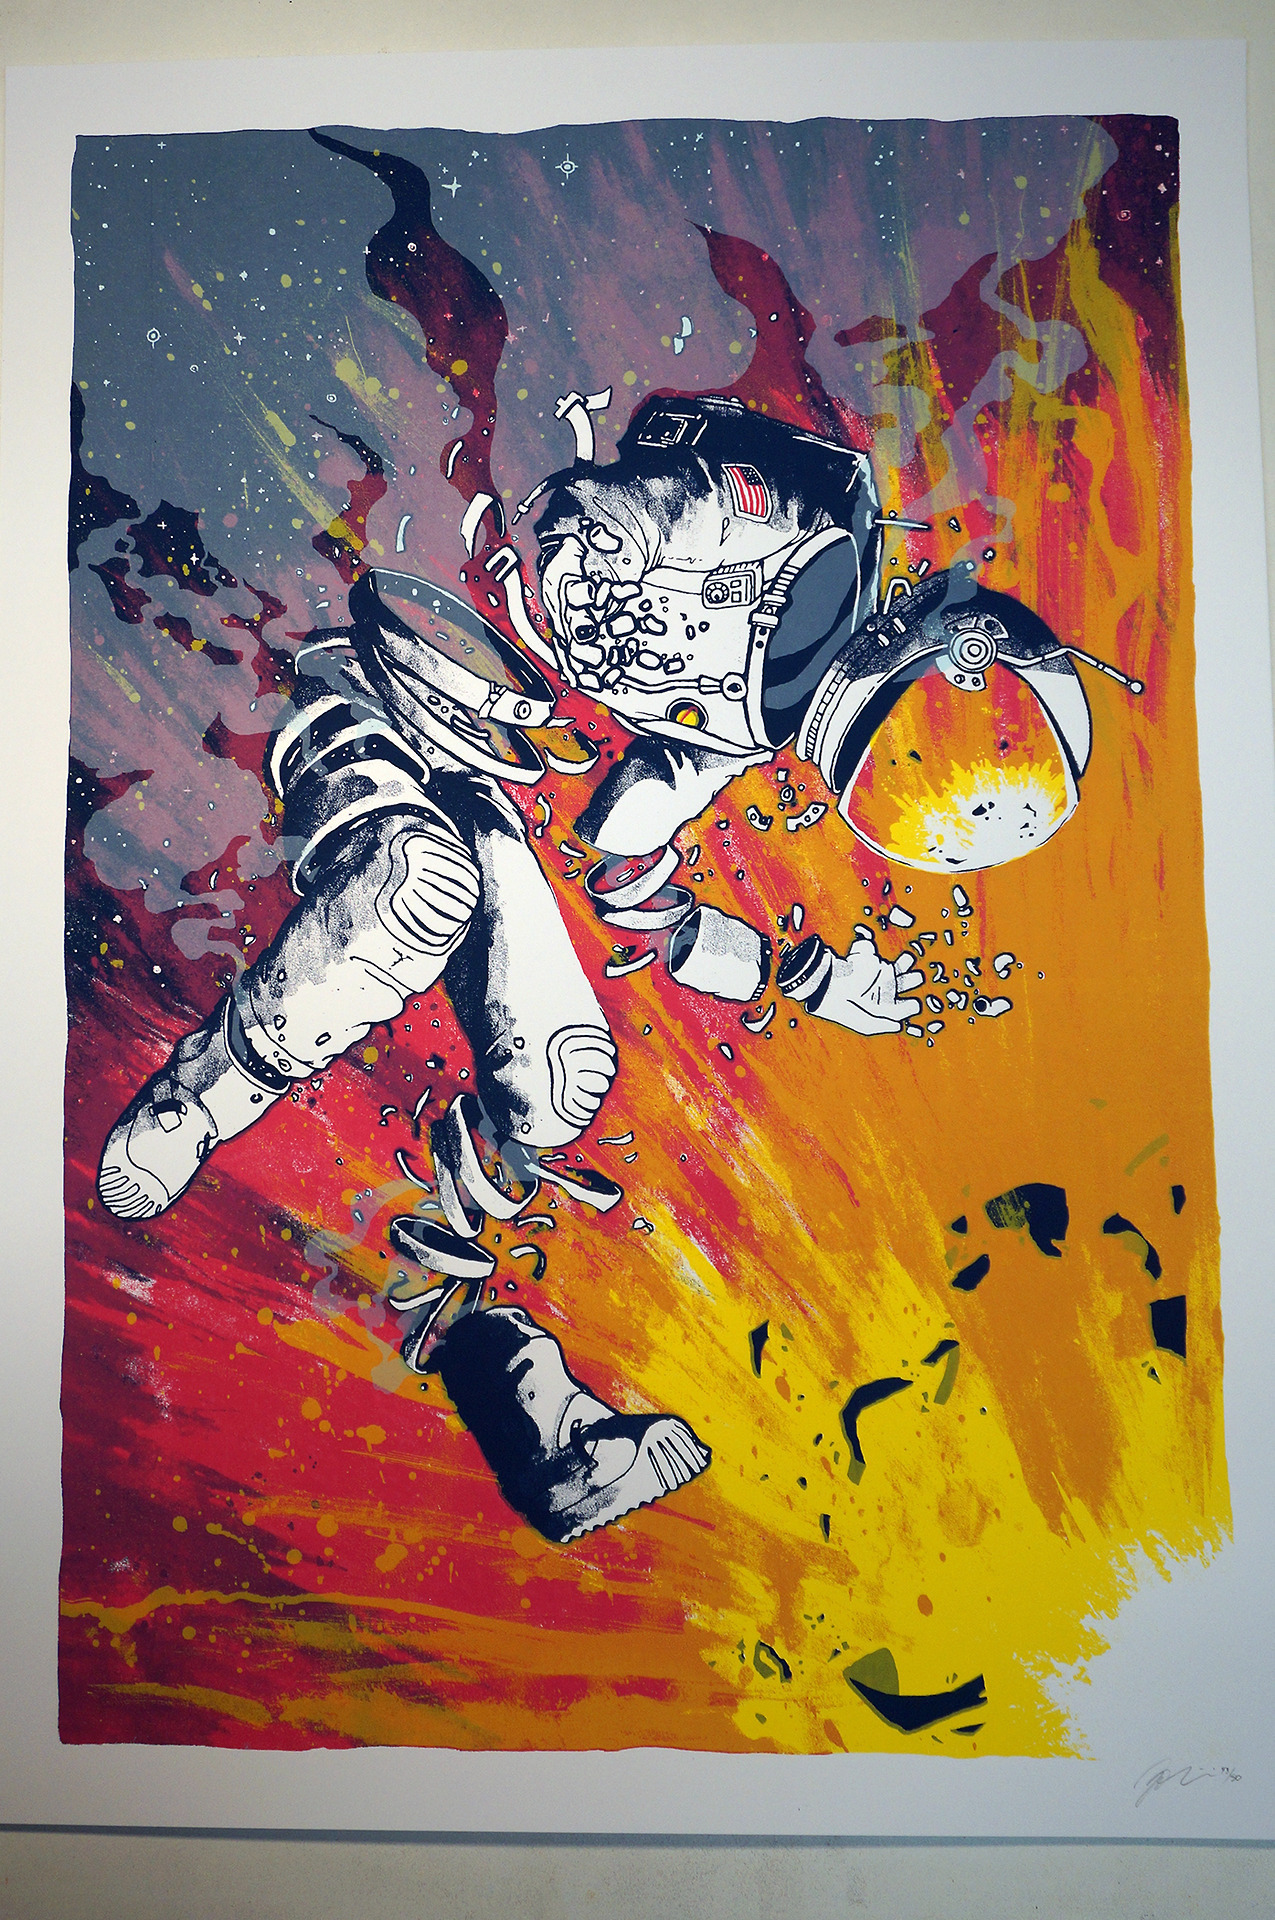 ‘Space Bummer’ Hand drawn, painted and silkscreen printed by Moon Light Speed. Check me out! http://moonlightspeed.storenvy.com/ — EatSleepDraw is working on something new and we want you to be the first to know about it. Make sure you’re on our...